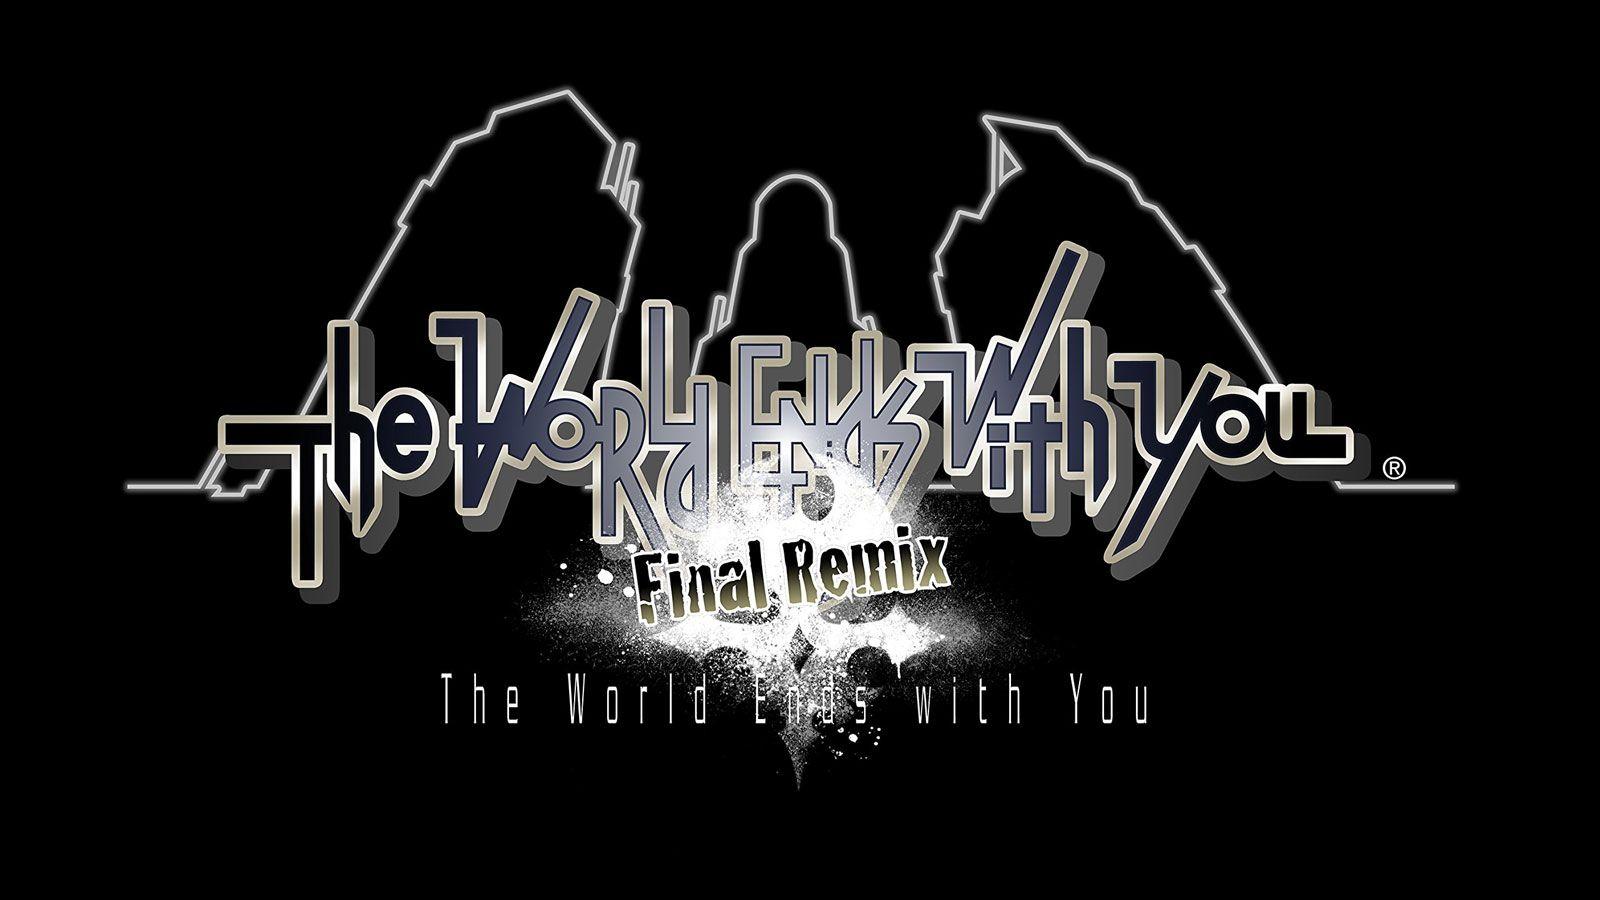 Pre Order The World Ends With You Final Remix On Switch And Save $12